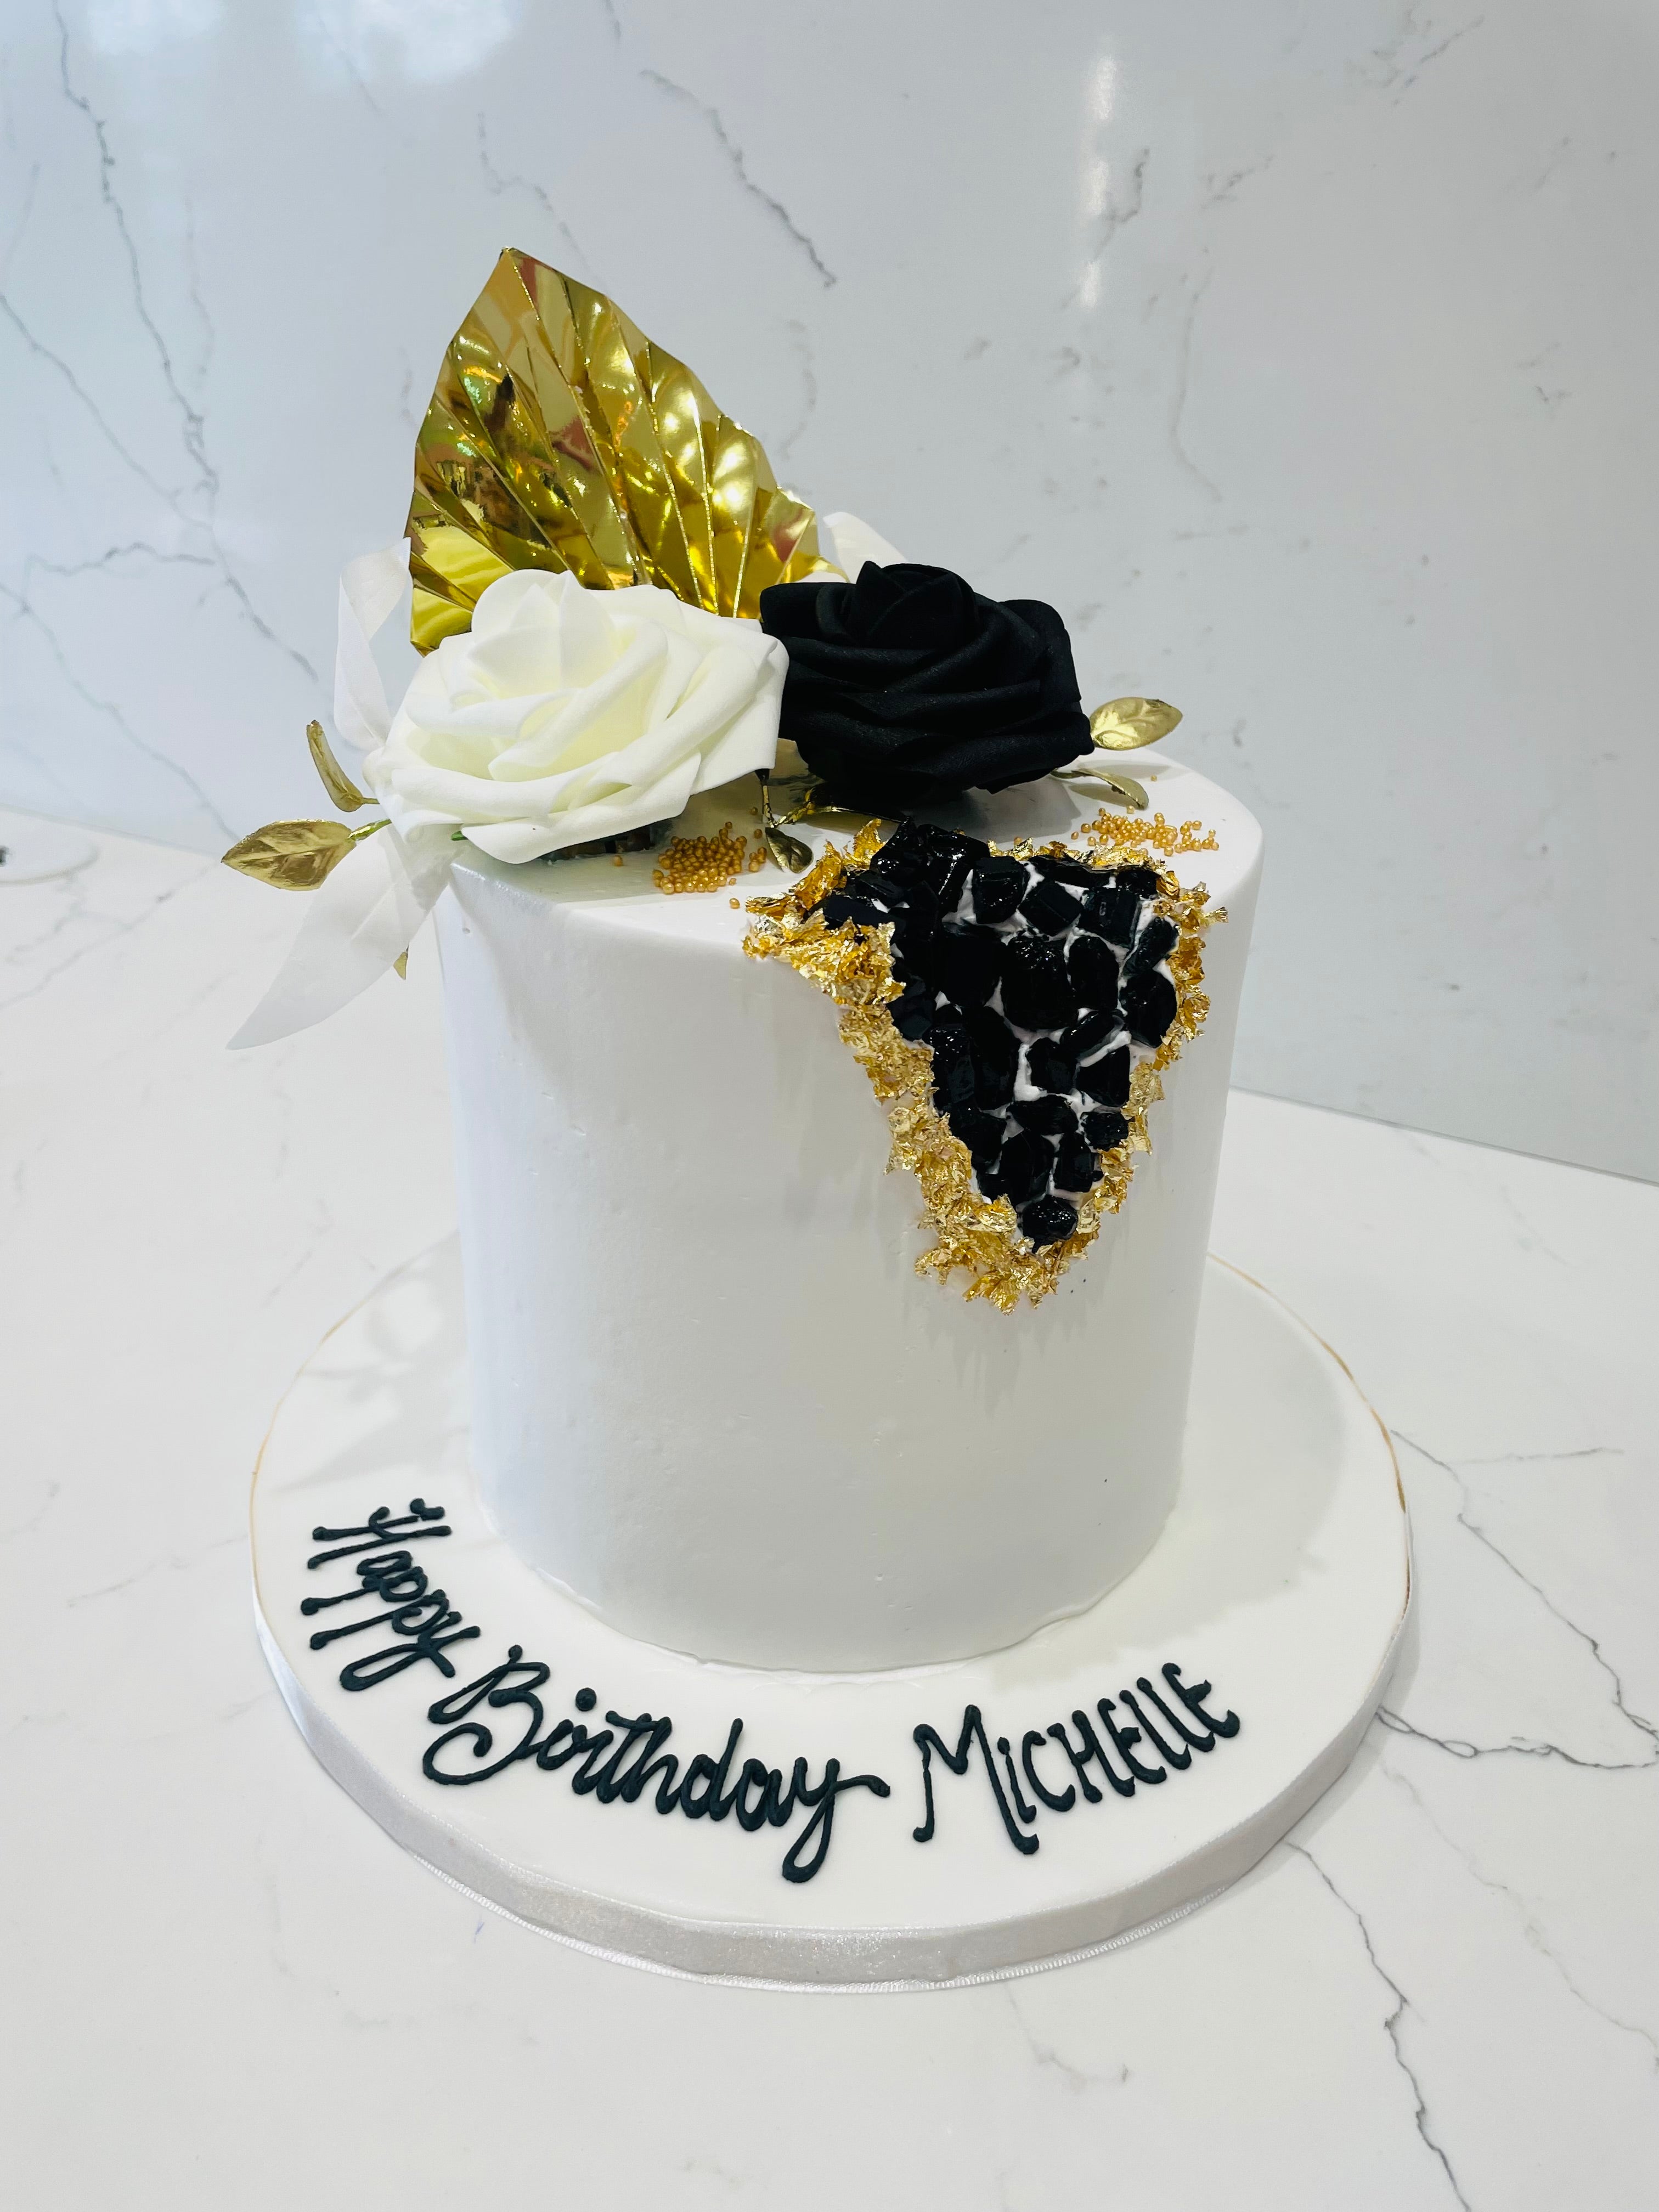 Cake Delivery in Canada, Send Cakes to Toronto Canada, Canada Cake - FNP